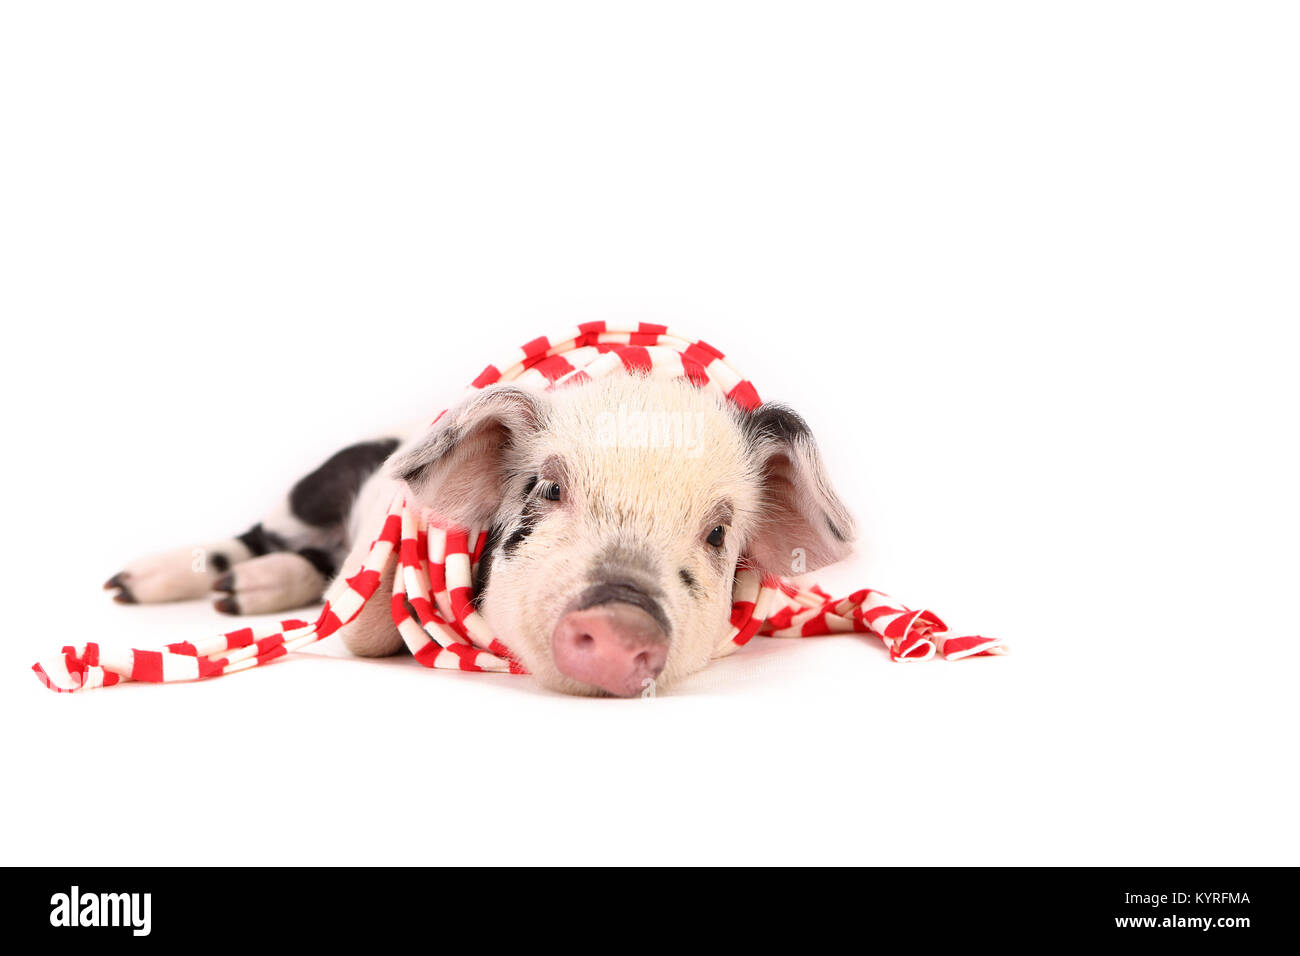 Domestic Pig, Turopolje x ?. Piglet (3 weeks old) lying, wearing a red-and-white scarf. Studio picture seen against a white background. Germany Stock Photo